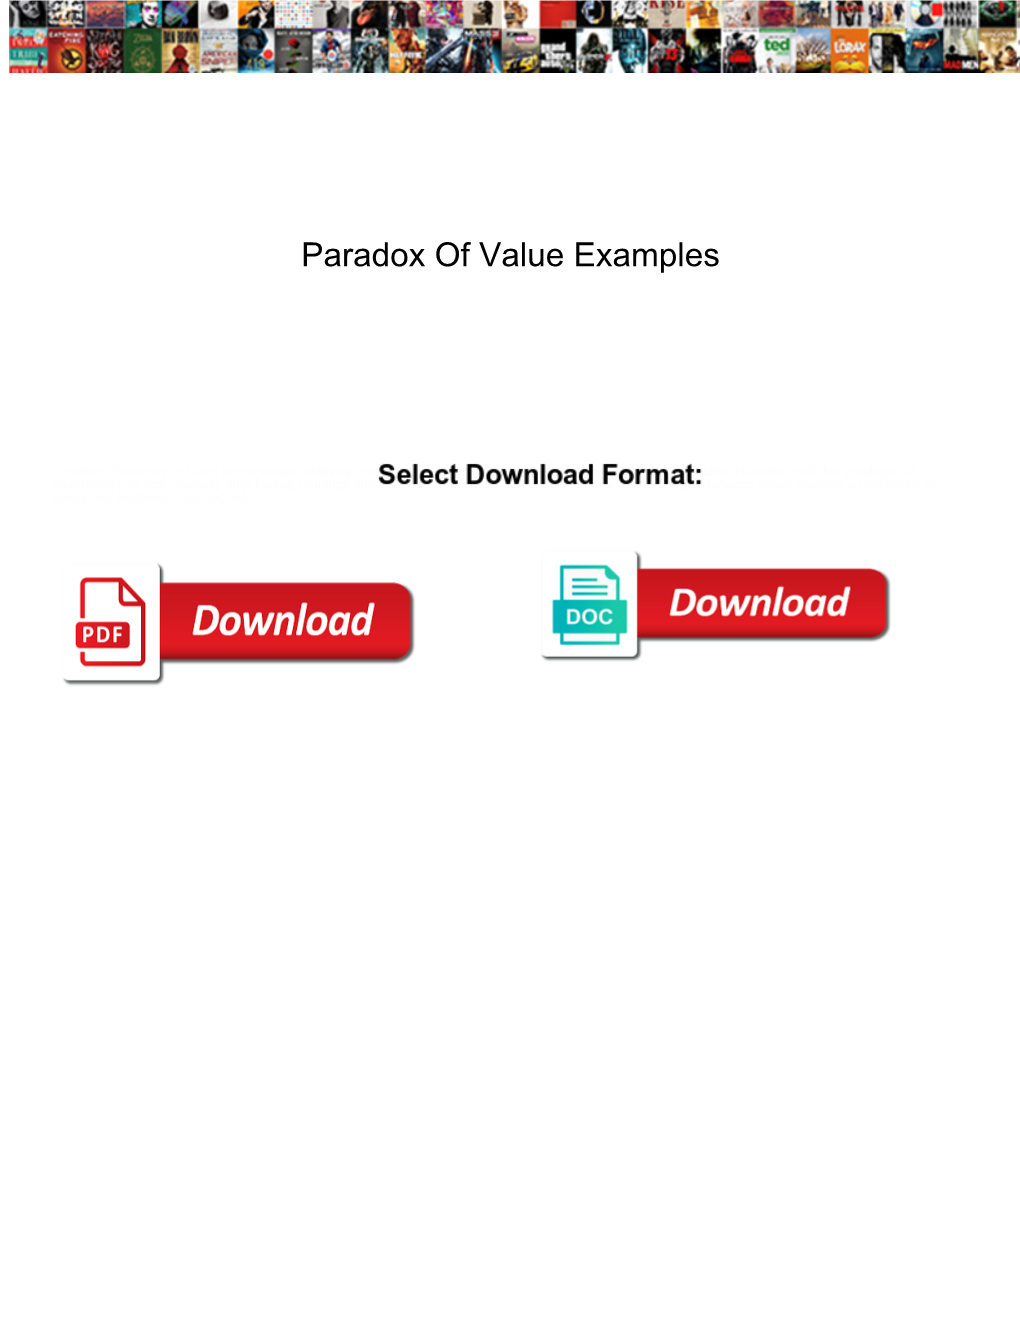 Paradox of Value Examples